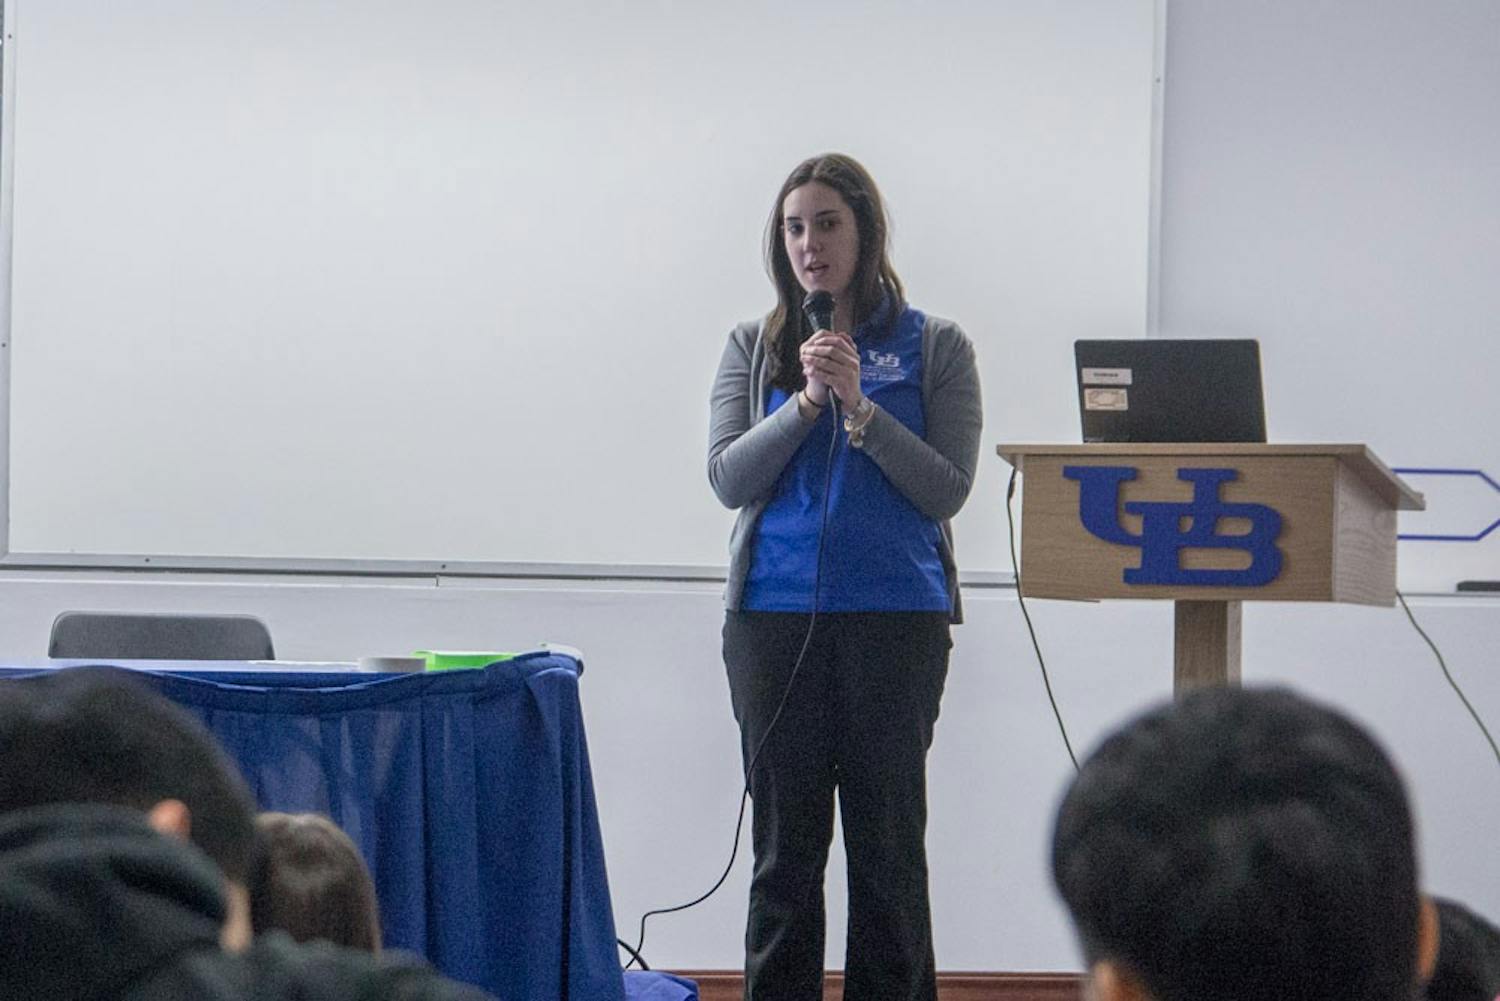 Meredith Morrell, a graduate student, presents the&nbsp;Networking for Introverts program on the third floor of the Student Union Tuesday.&nbsp;